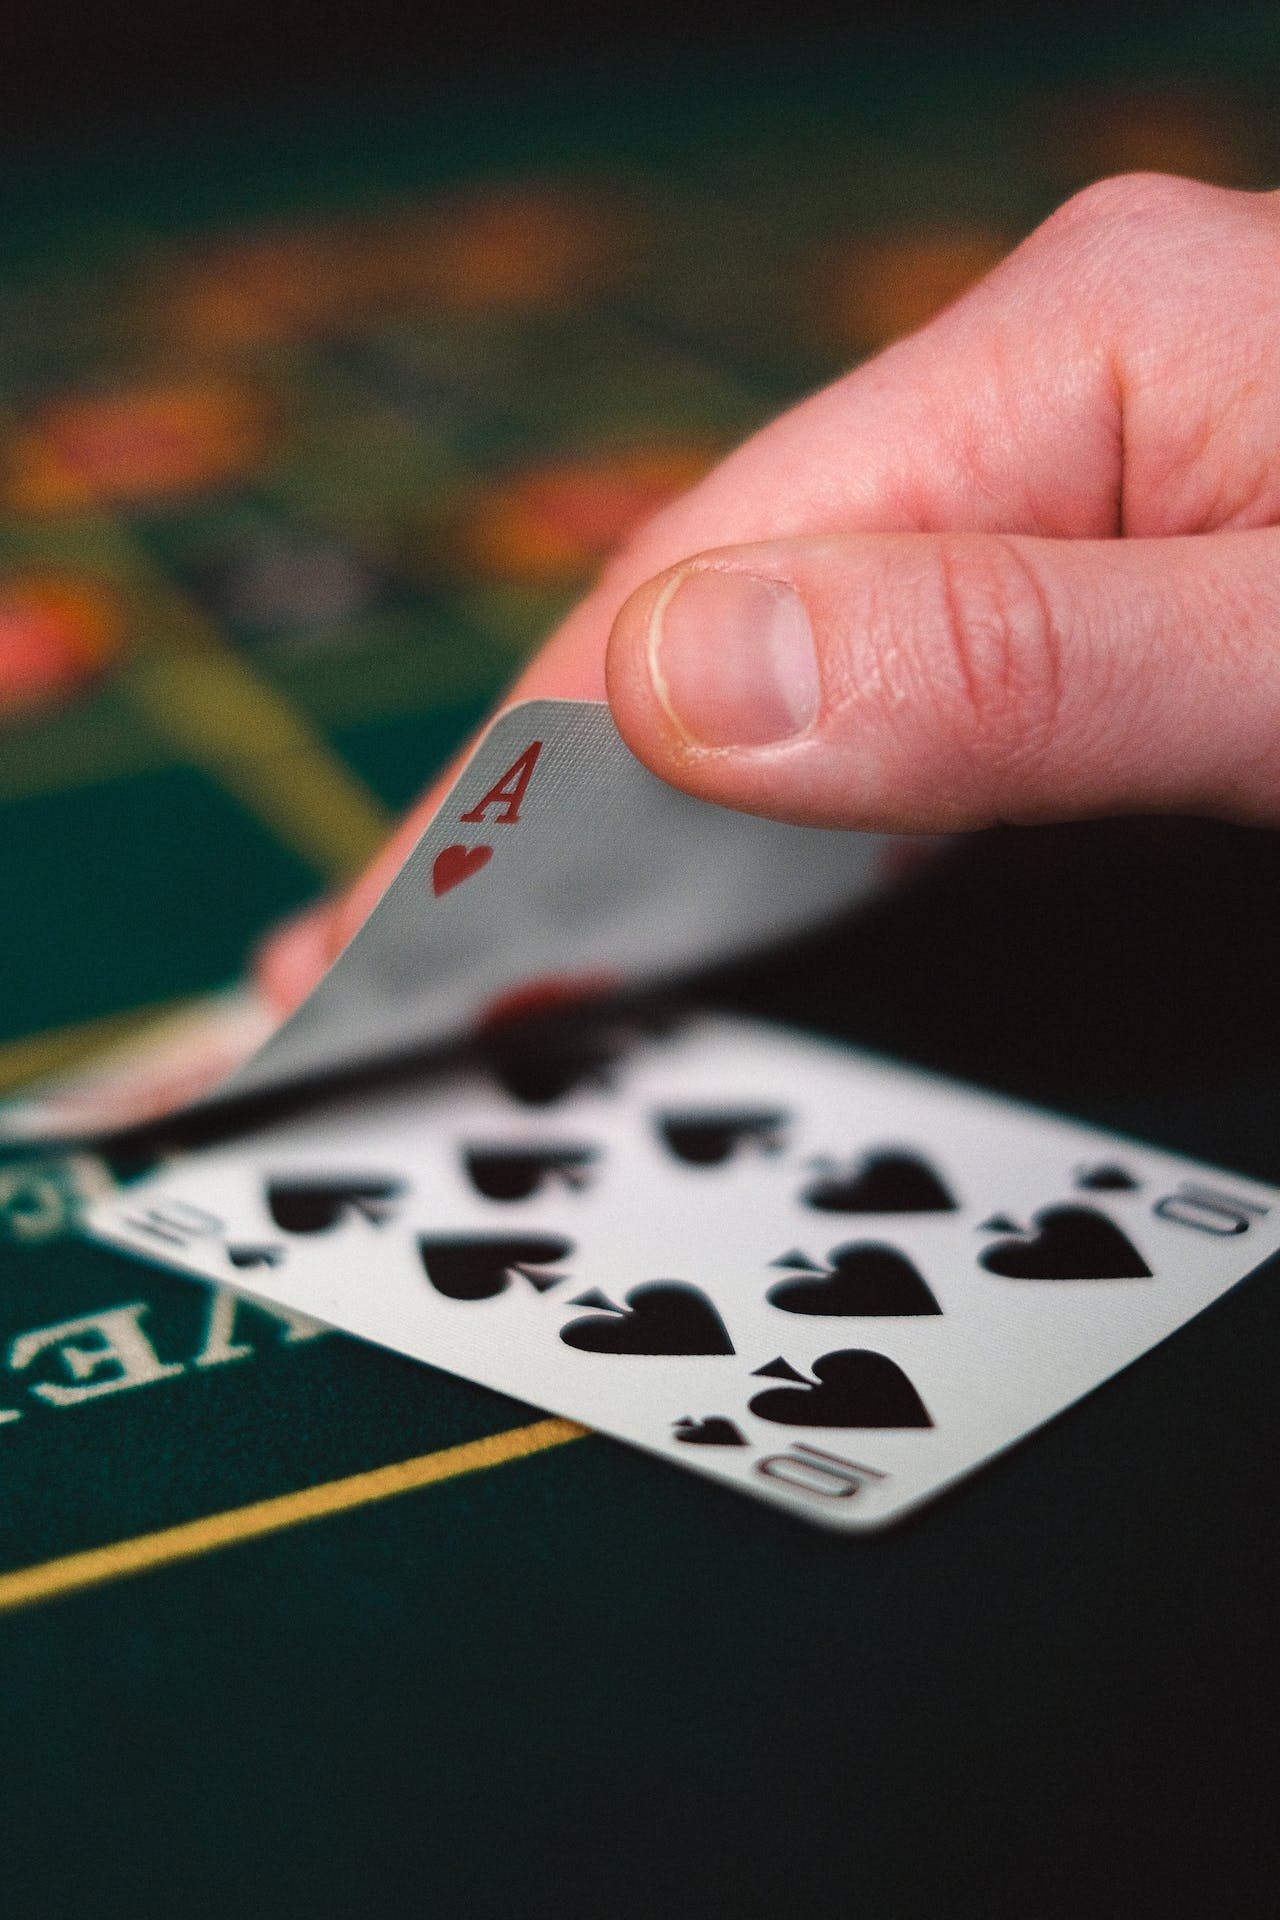 Wagering Requirements for online casinos?